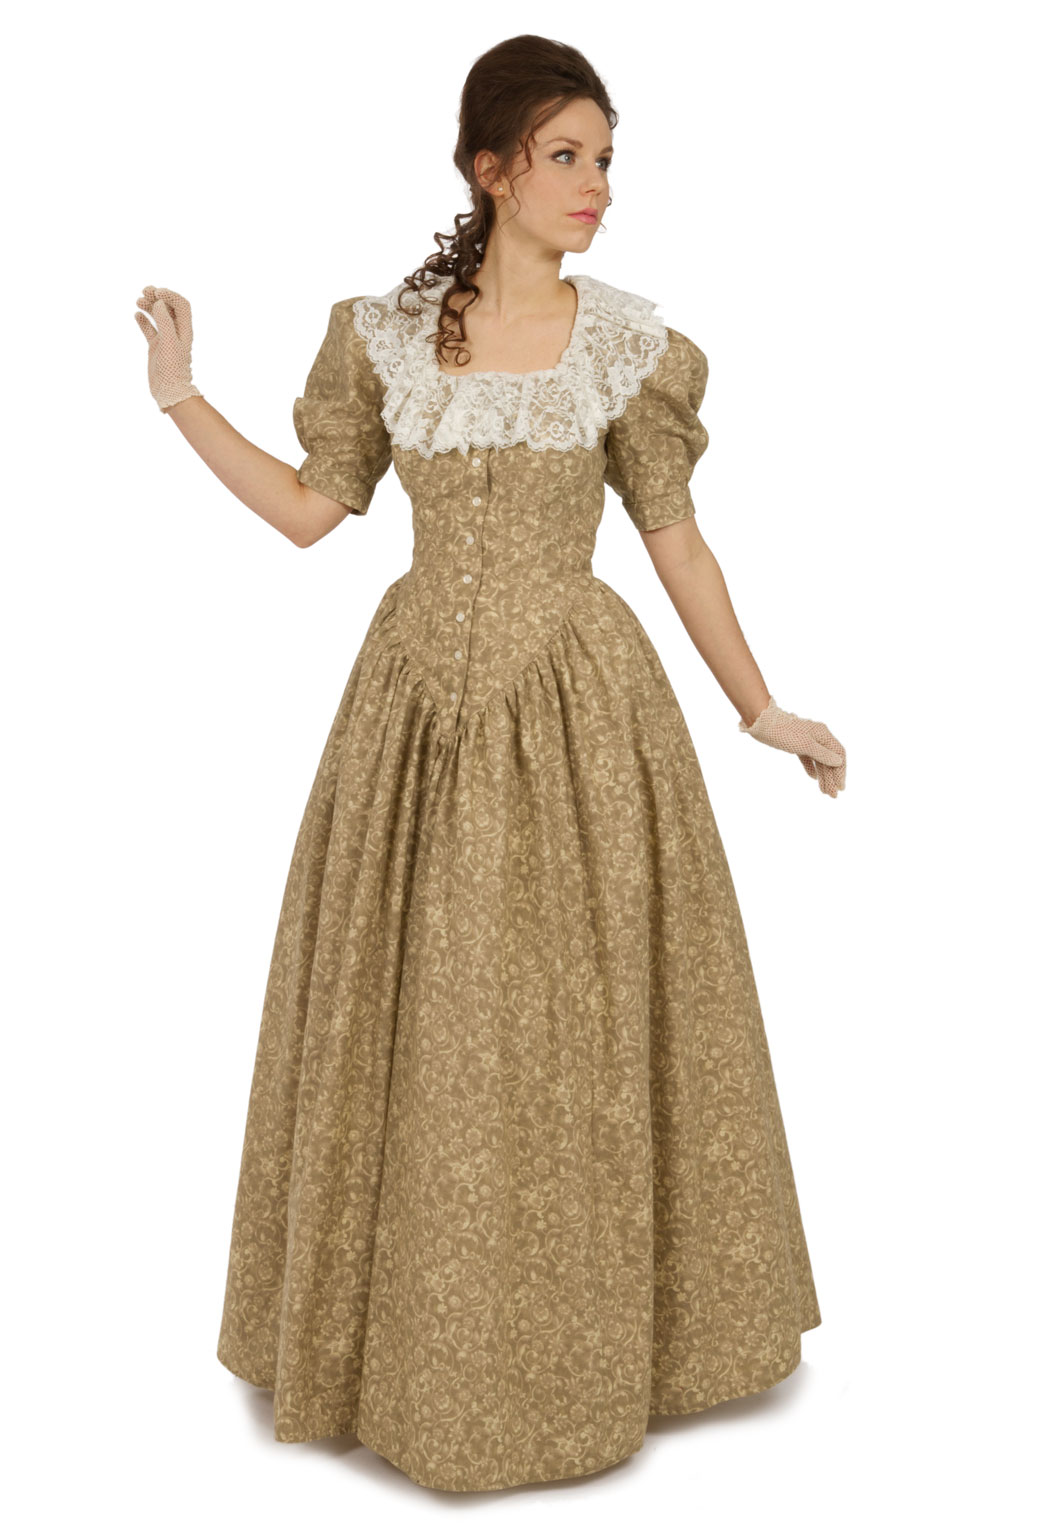 Camille Victorian Style Dress | Recollections